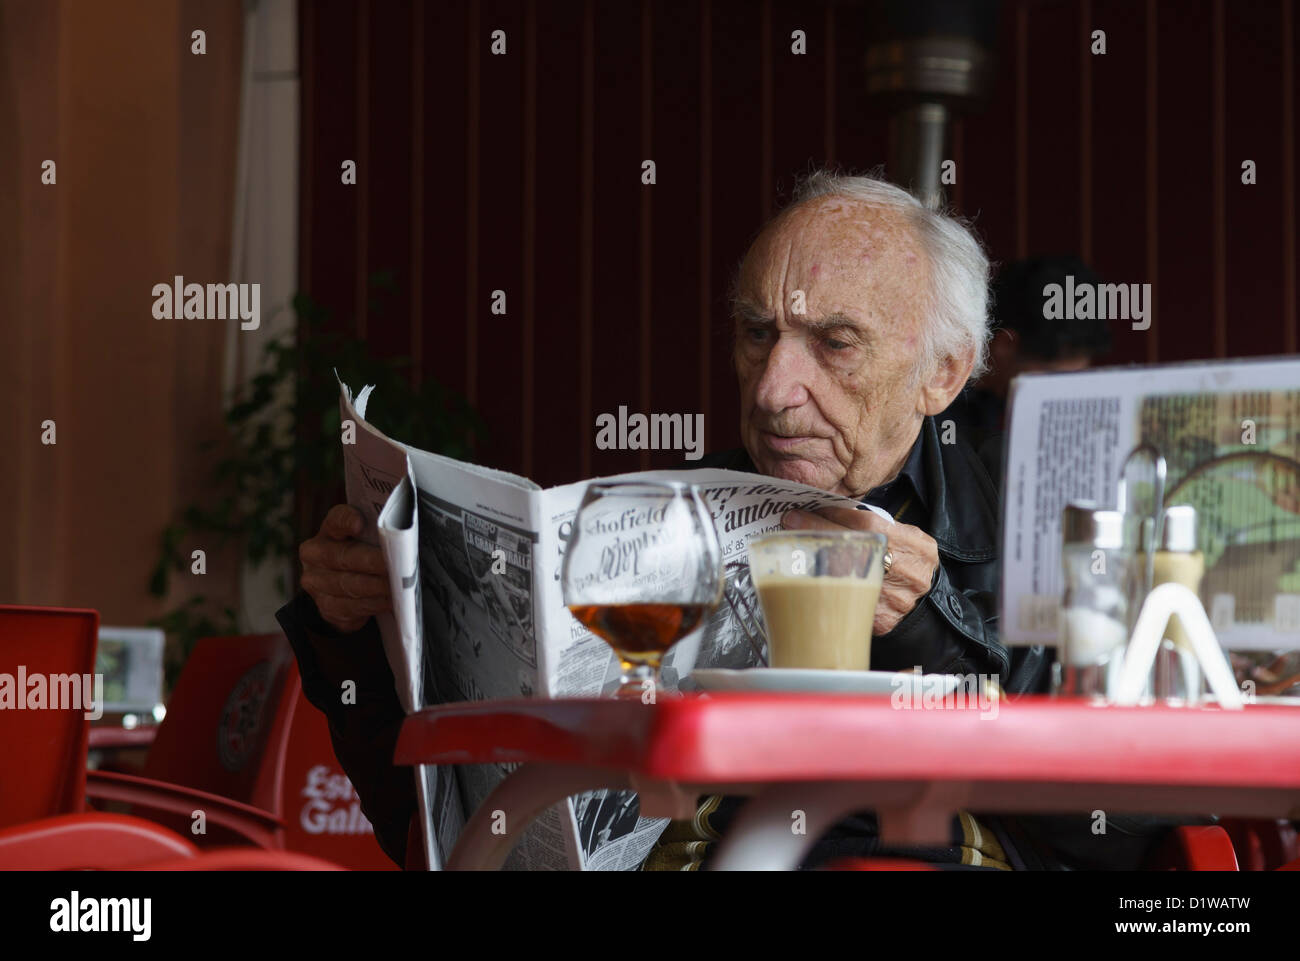 Spain, Andalucia - gentleman reading English language newspaper with a coffee and brandy, Costa del Sol. Stock Photo